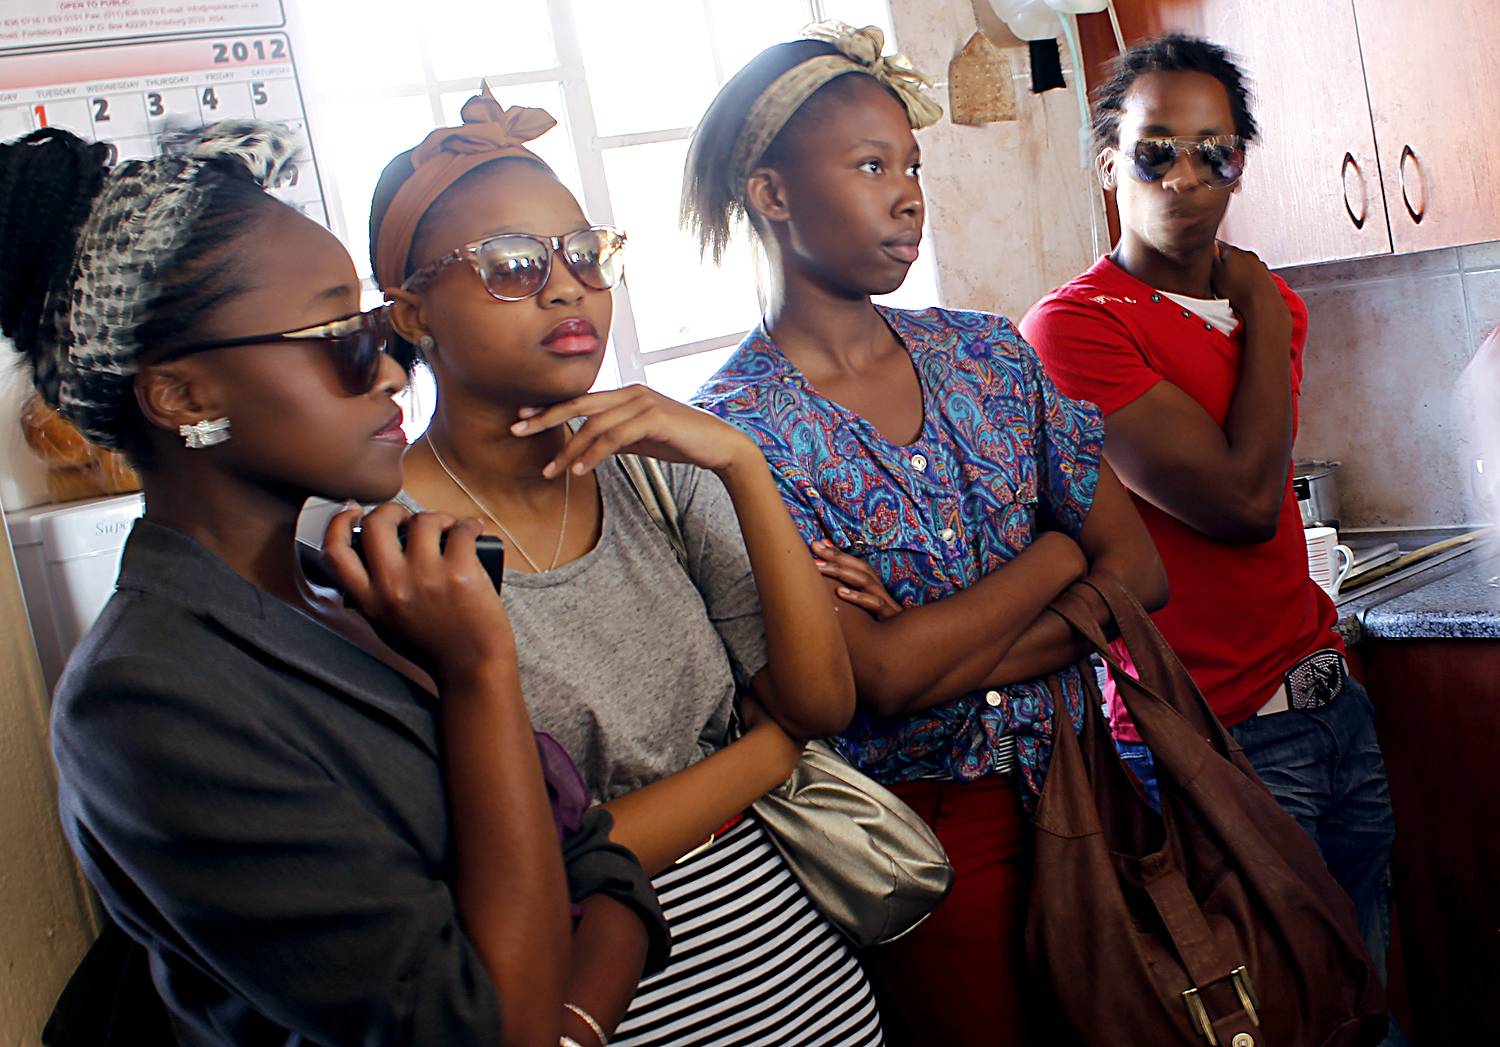 Soweto Gets Dolled Up for Inaugural Fashion Week - Last week, one of South Africa’s most famous but most impoverished townships got a chance to show off its creativity and rich history in Soweto's first fashion week.&quot;It's a great opportunity. It's a long time coming. There's a lot of talent that's going on in the townships,&quot; said 29-year-old designer Tebogo Lehlabi, according to the Associated Press.(Photo: AP Photo/Jerome Delay)